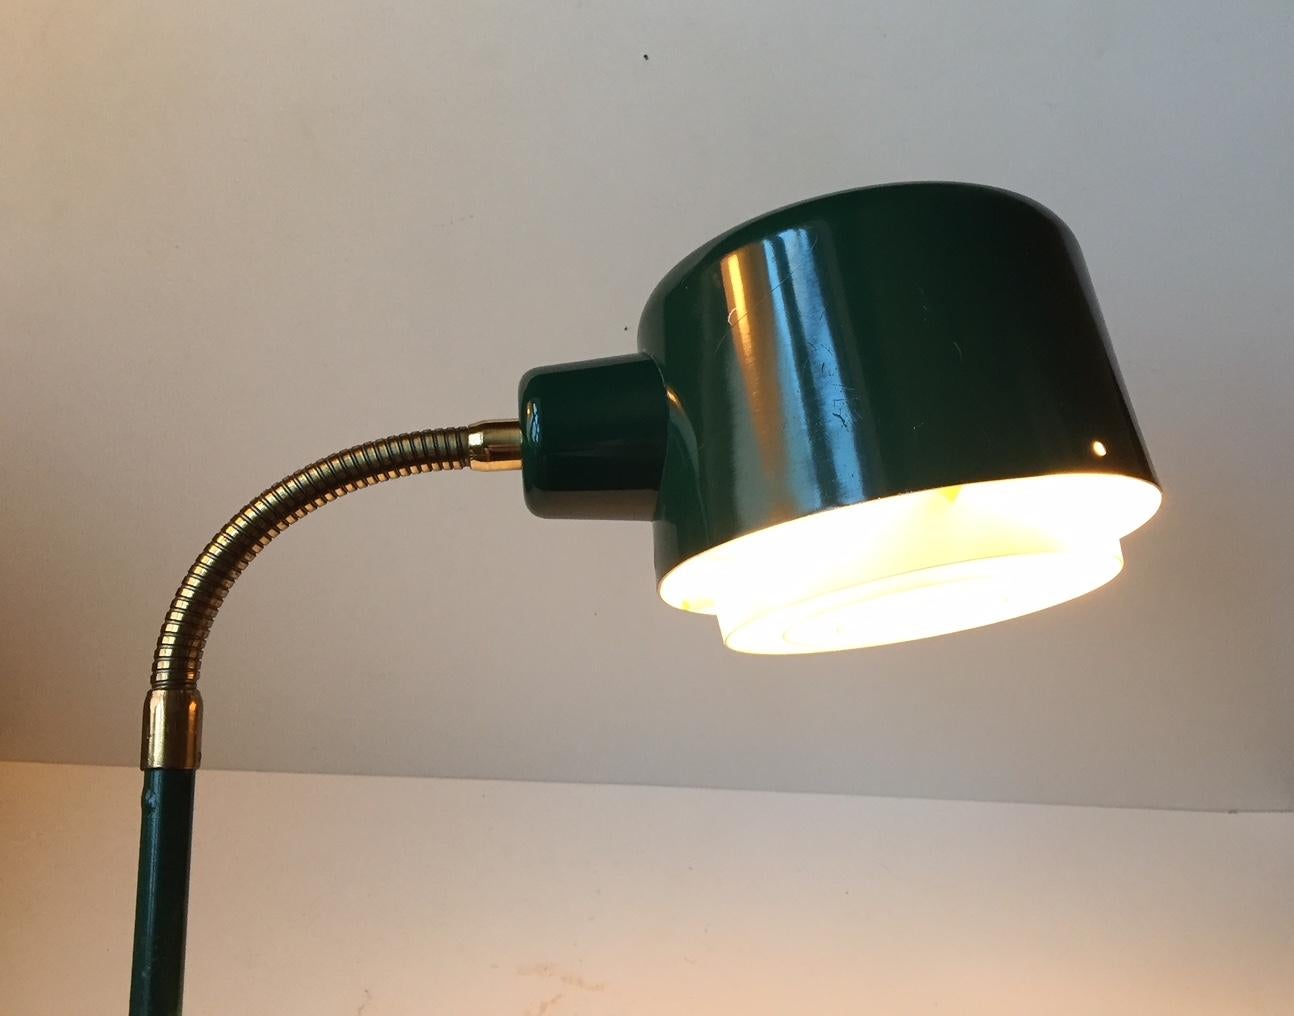 Small floor lamp (120 cm max height) designed by Hans Agne-Jakobsson and manufactured by Elidus in Sweden during the 1970s. Its made from green powder coated steel and aluminium (shade and base) and it has a multi-adjustable brass gooseneck. The